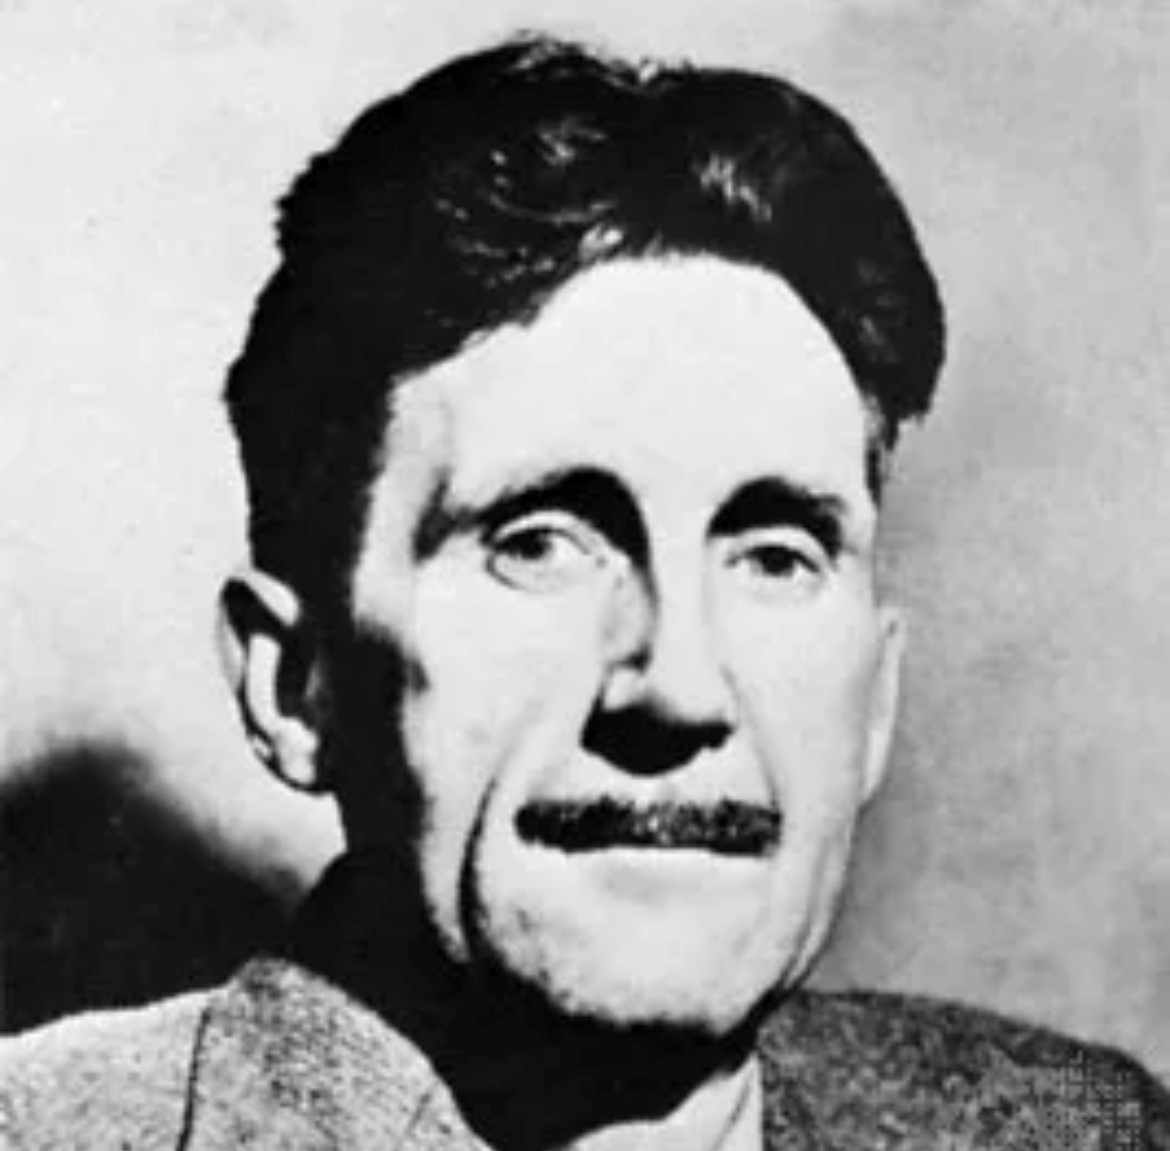 #GeorgeOrwell born 25 June 1903 Novelist best known for Animal Farm & 1984. “Every generation imagines itself to be more intelligent than the one that went before it, and wiser than the one that comes after it.”